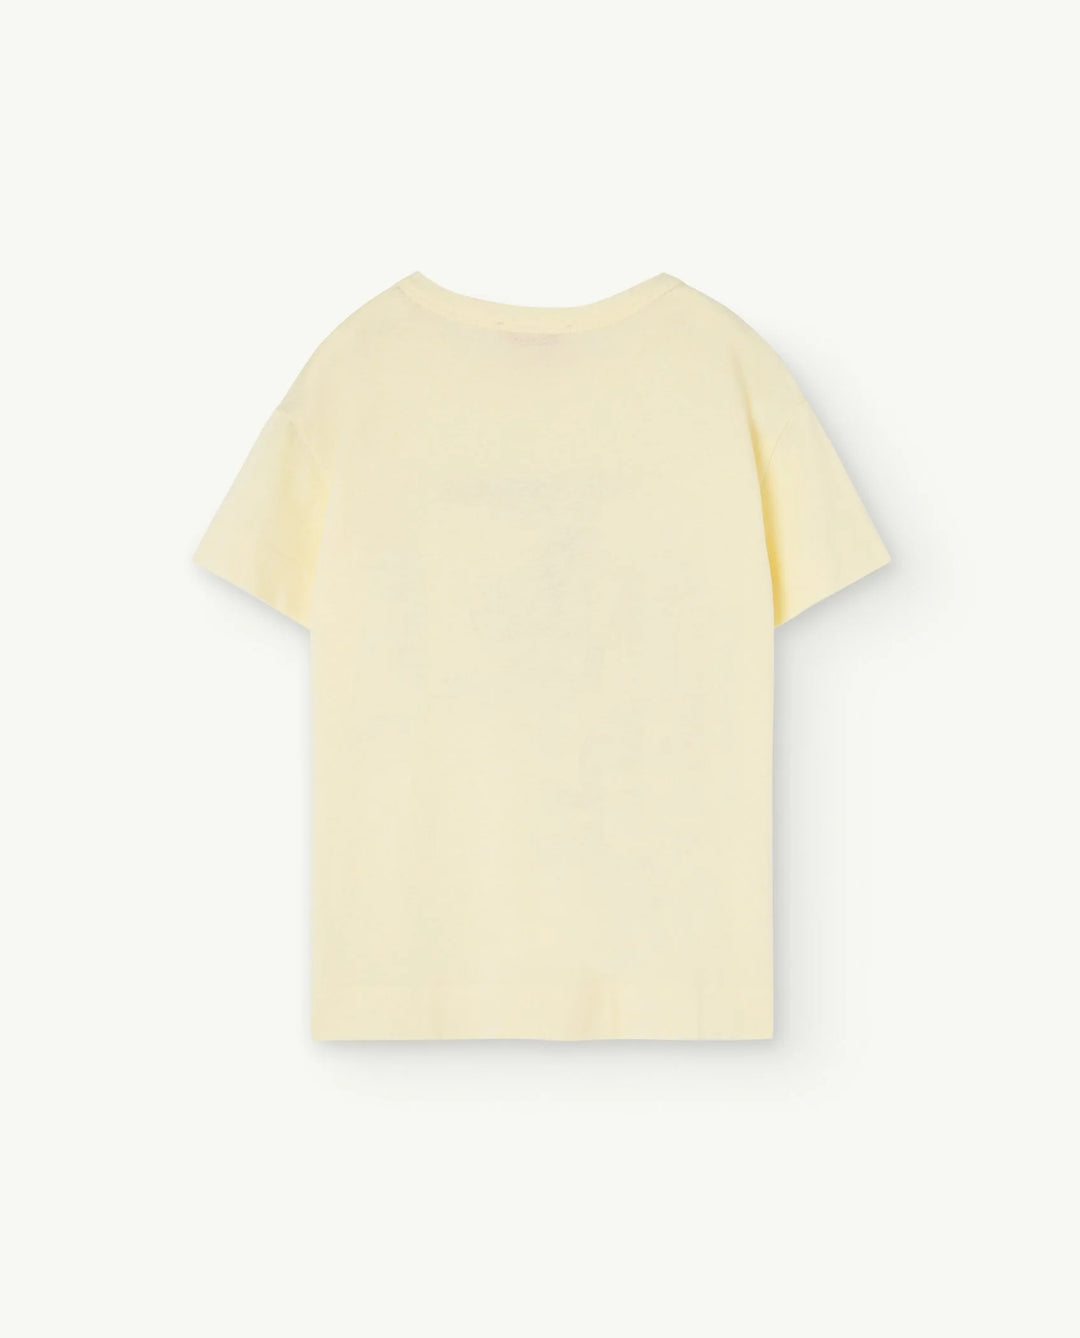 THE ANIMALS OBSERVATORY Kids Soft Yellow Rooster T-Shirt